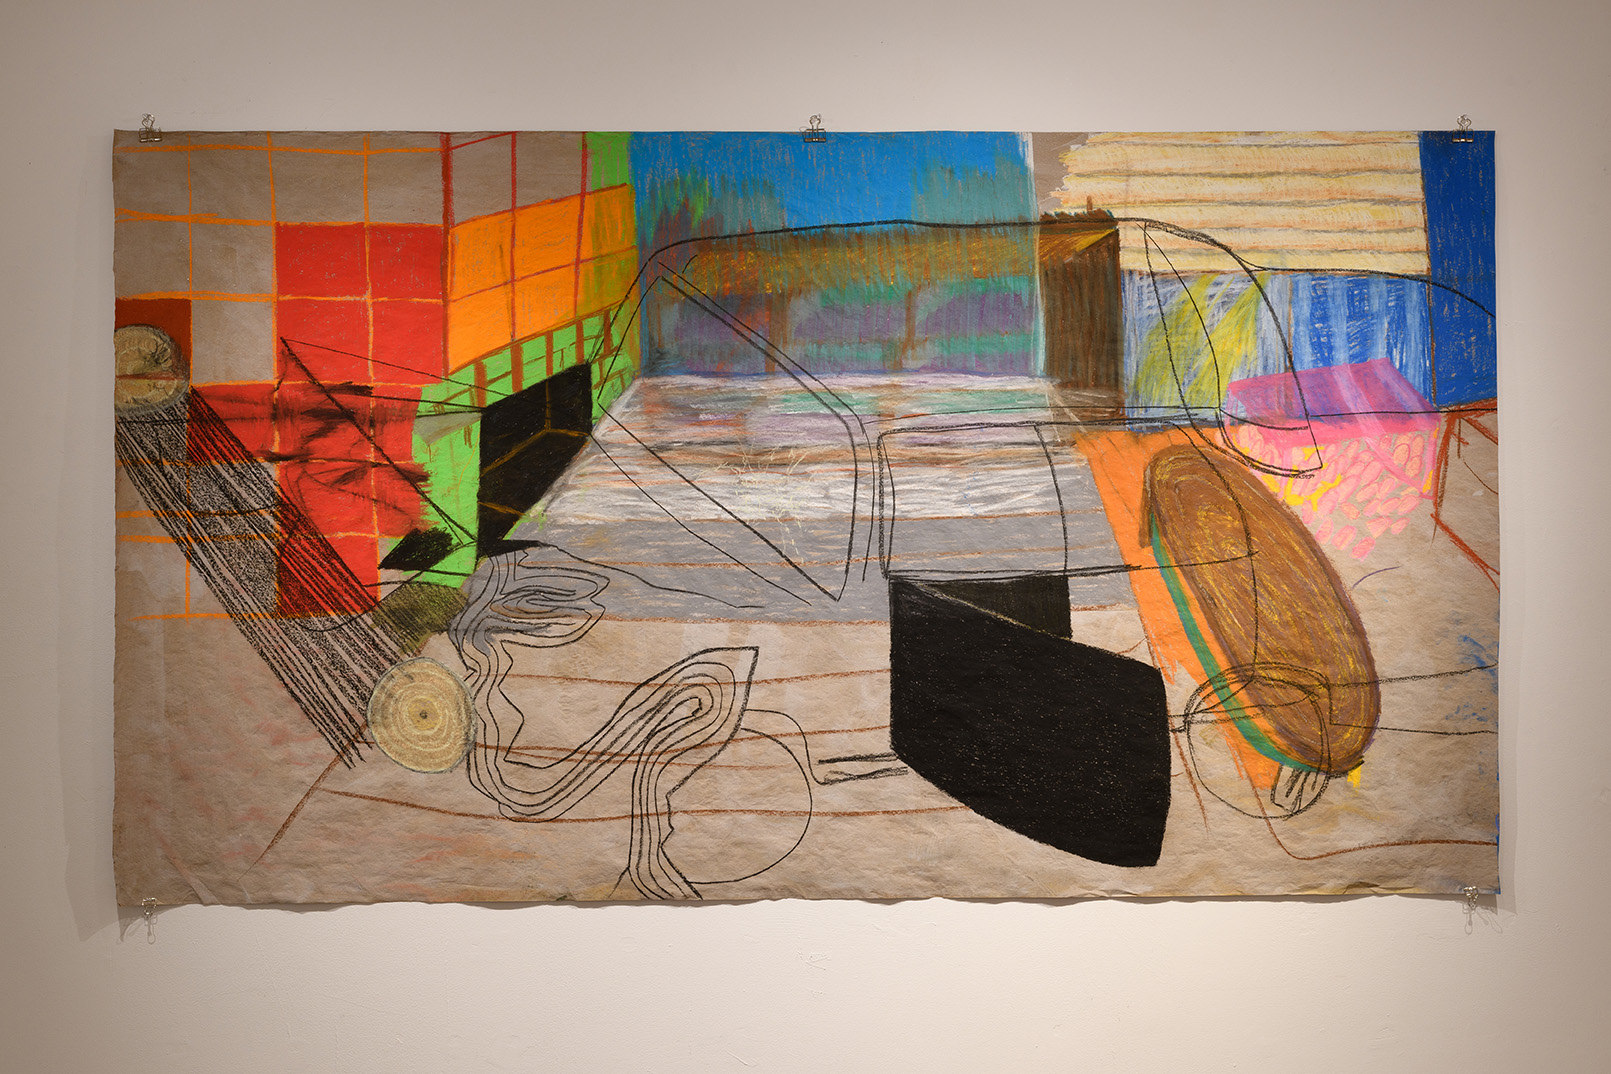 [A large drawing hangs directly on a white wall, unframed. The spatially complex pictureplane feels like a series of interconnected rooms made up of discrete yet related domestic features: wall paneling, bathroom tiling, a fireplace, windows, outdoor scenery, curtains, and shades. Centered within the picture is a contour line drawing of a car, door open, stalled out or stationed inside a dream-space.]